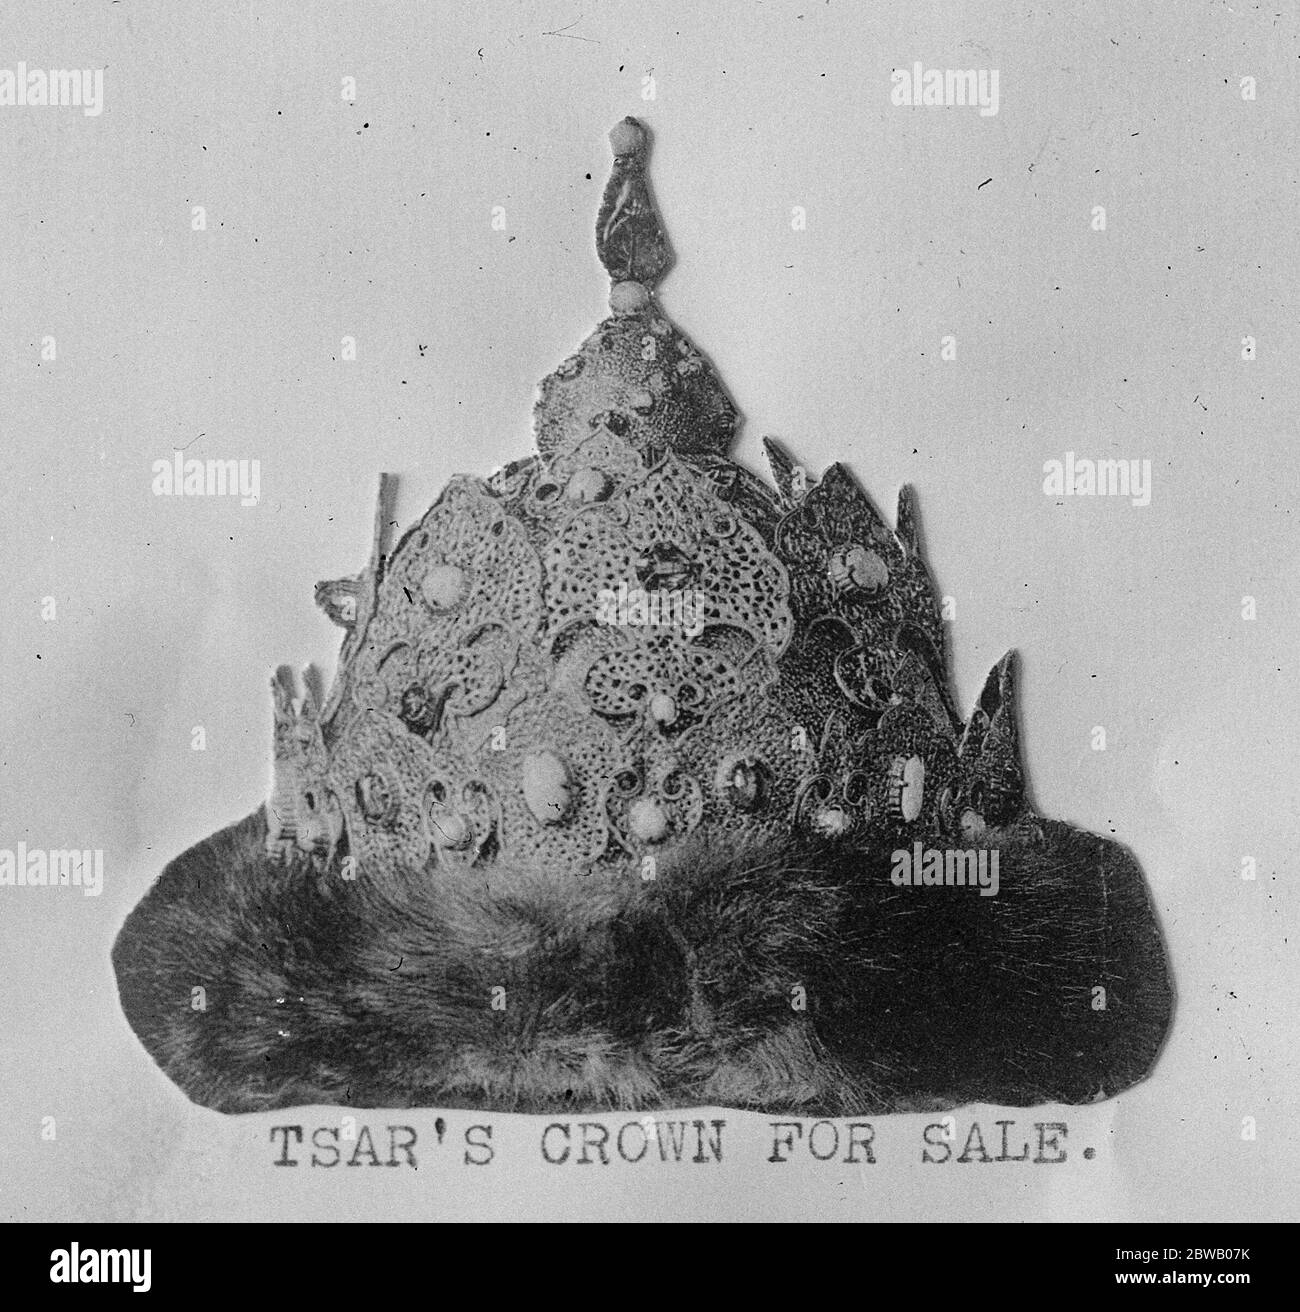 Russian Crown Jewels for Sale It is reported that the Soviet Goverment proposes to sell the crowns of the former Imperial family which are guarded at the Kremlin . They are valued at £ 70 000 000 19 July 1922 Stock Photo